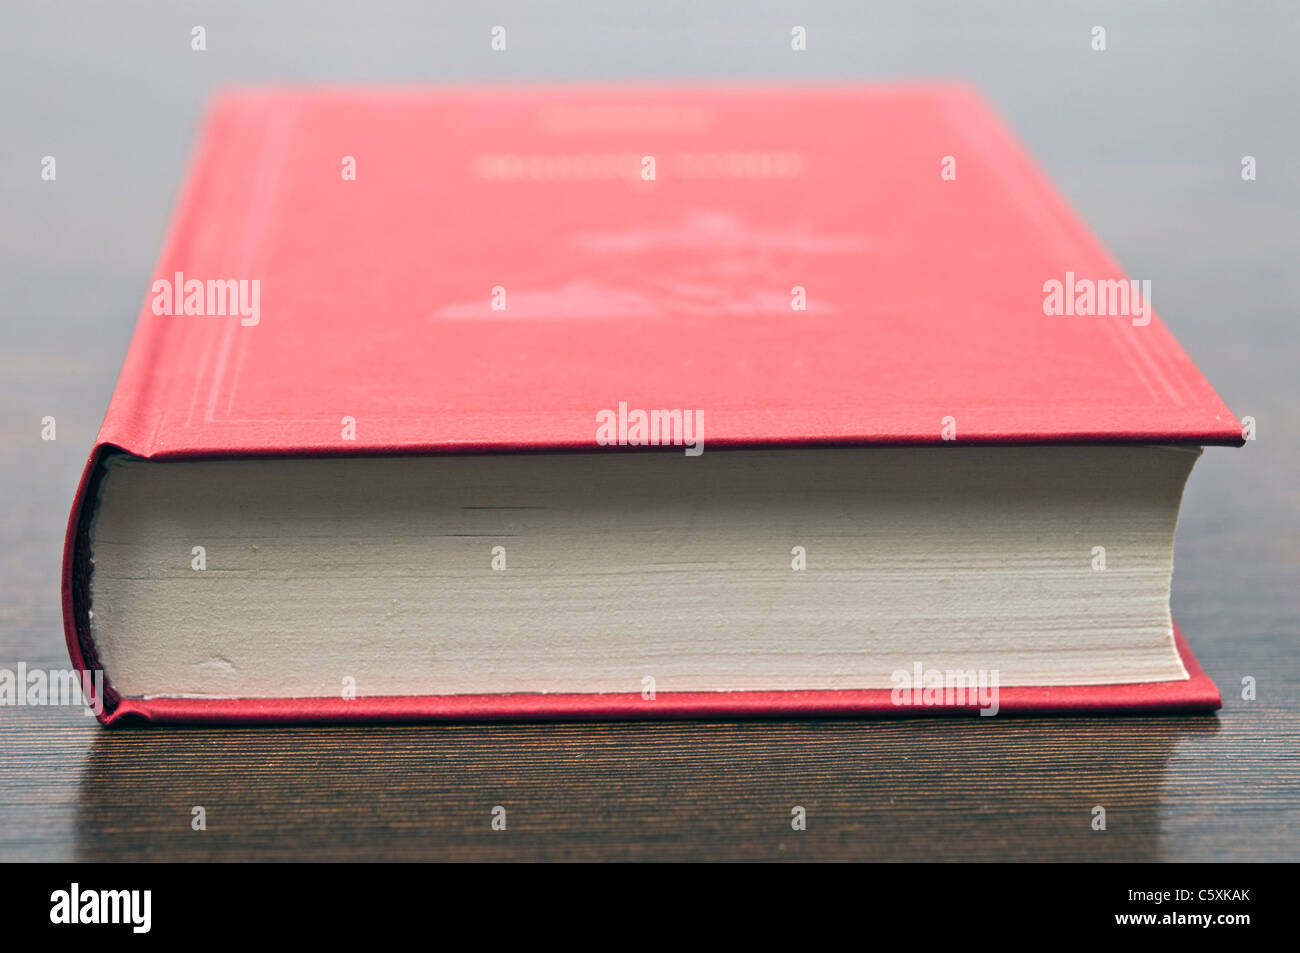 Blank red hardback book cover ready for text or graphic isolated